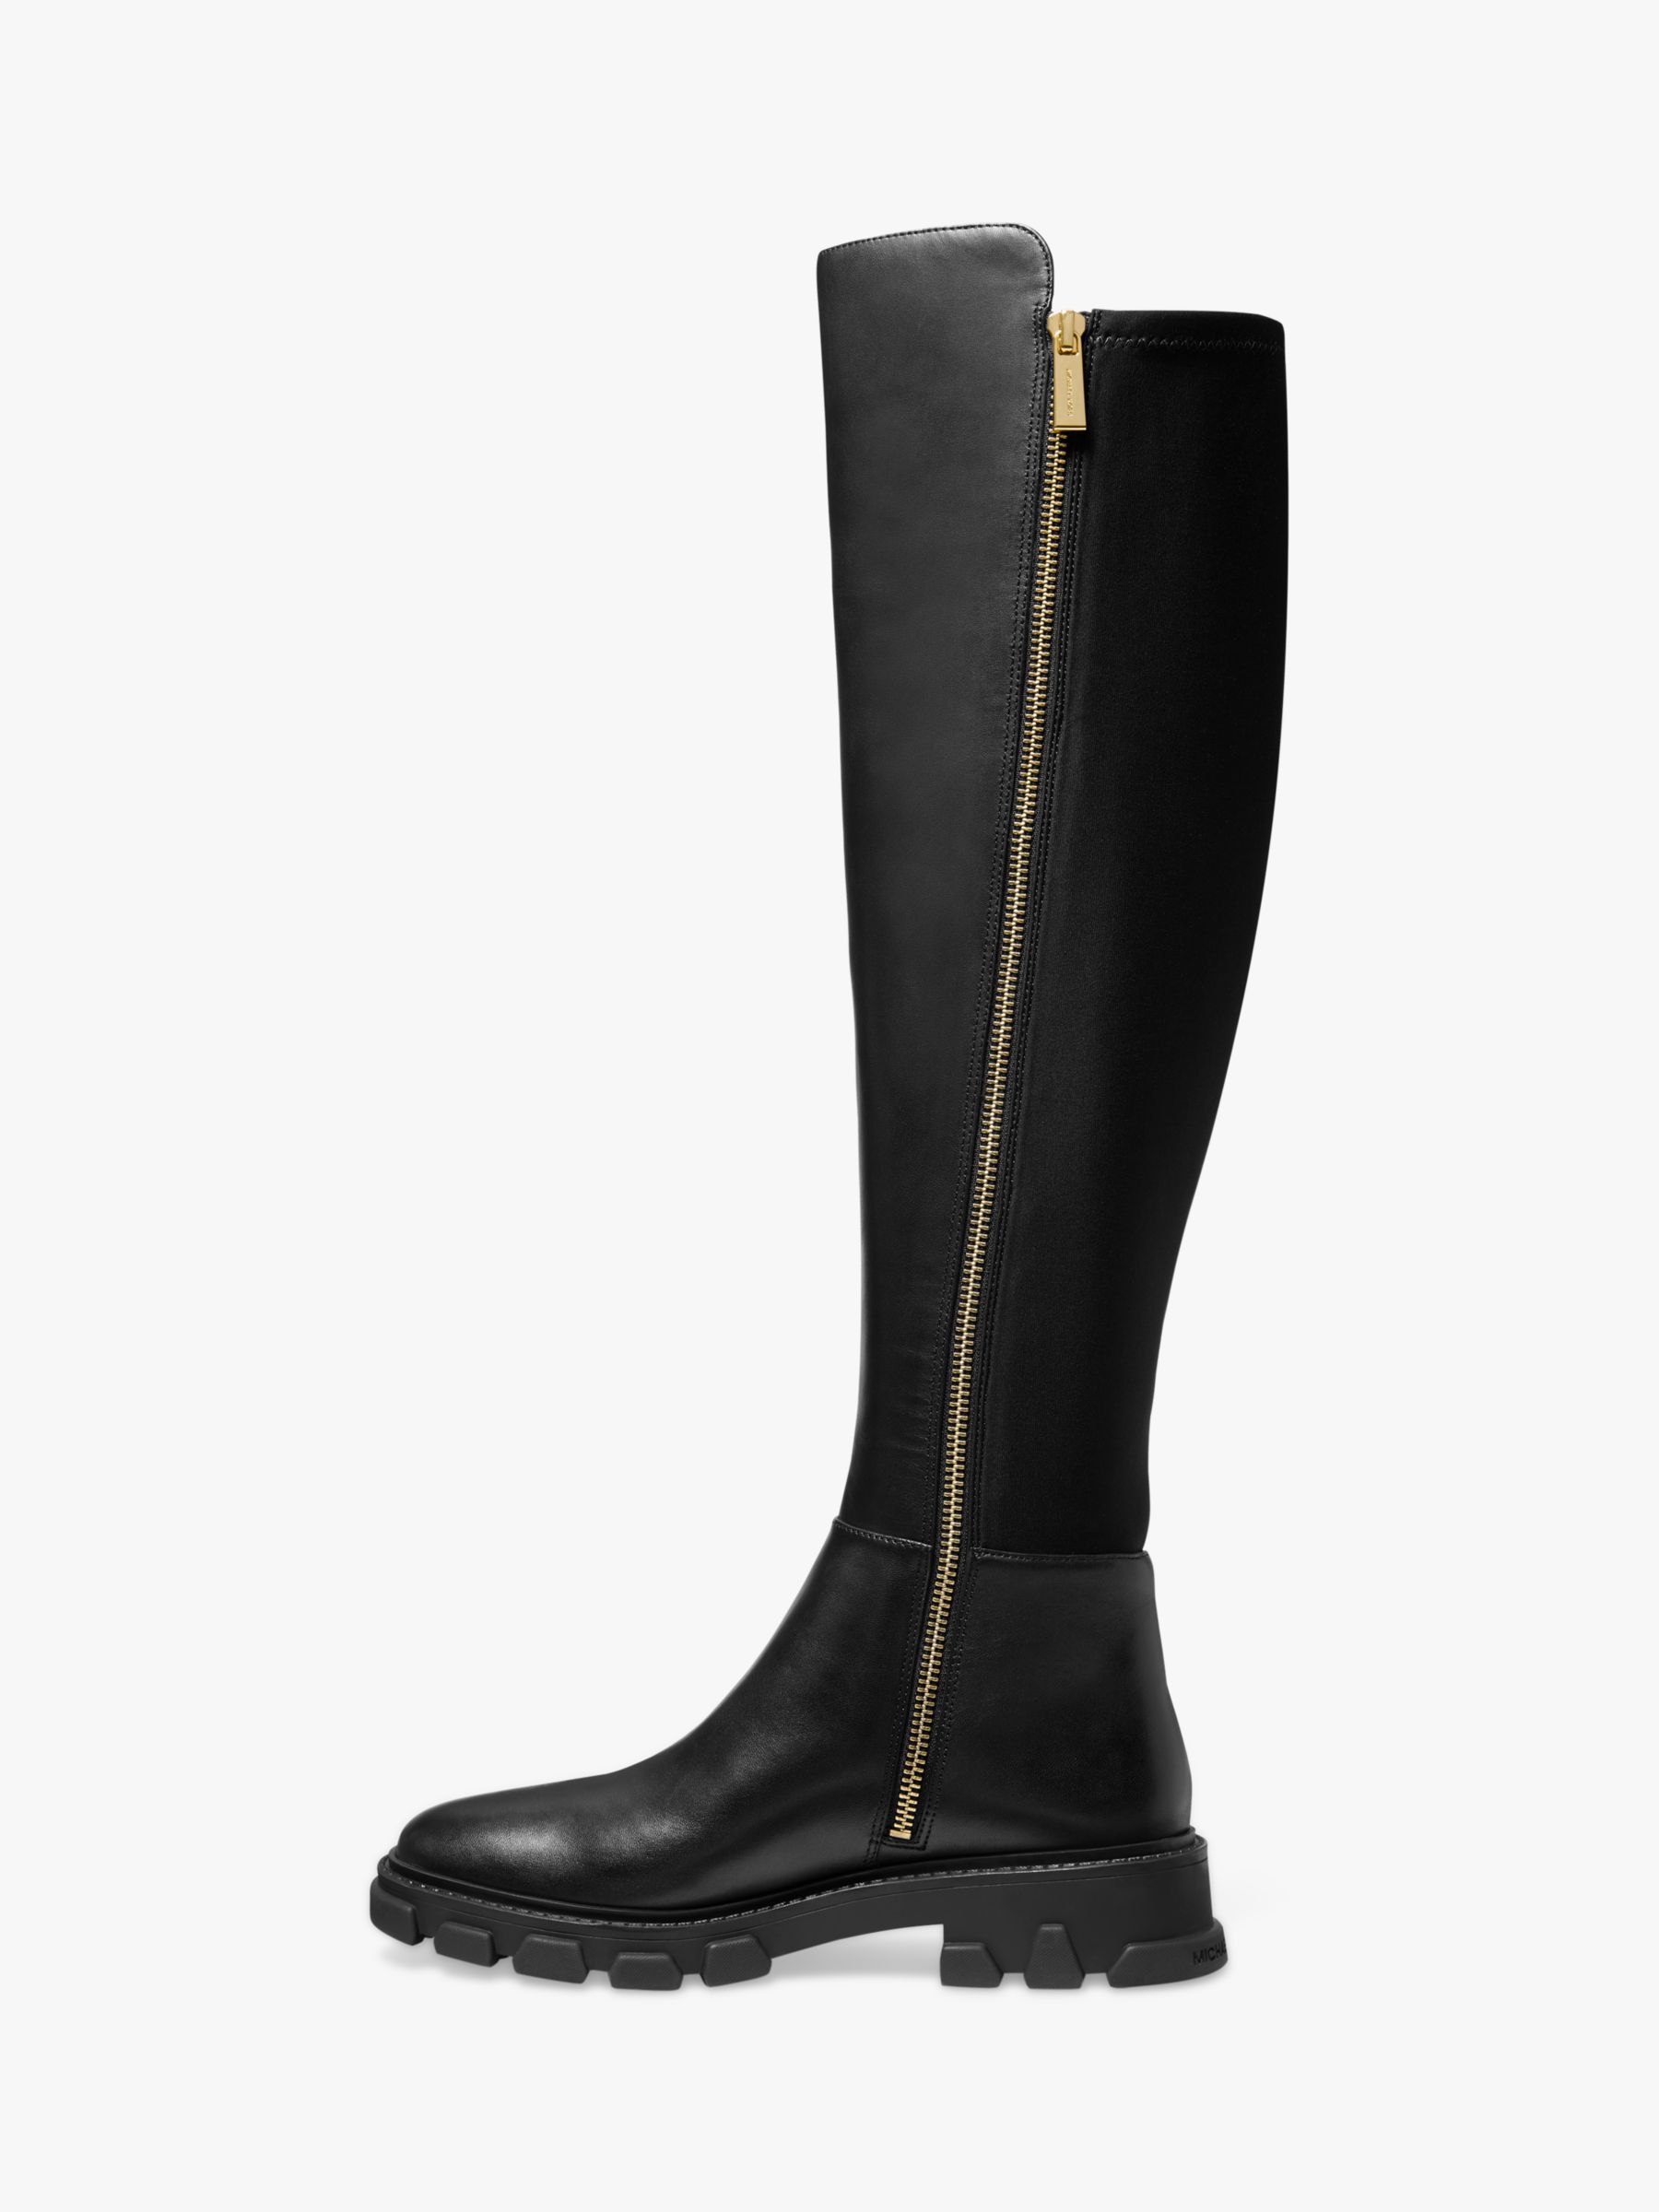 Michael Kors Ridle Knee High Leather Boots, Black